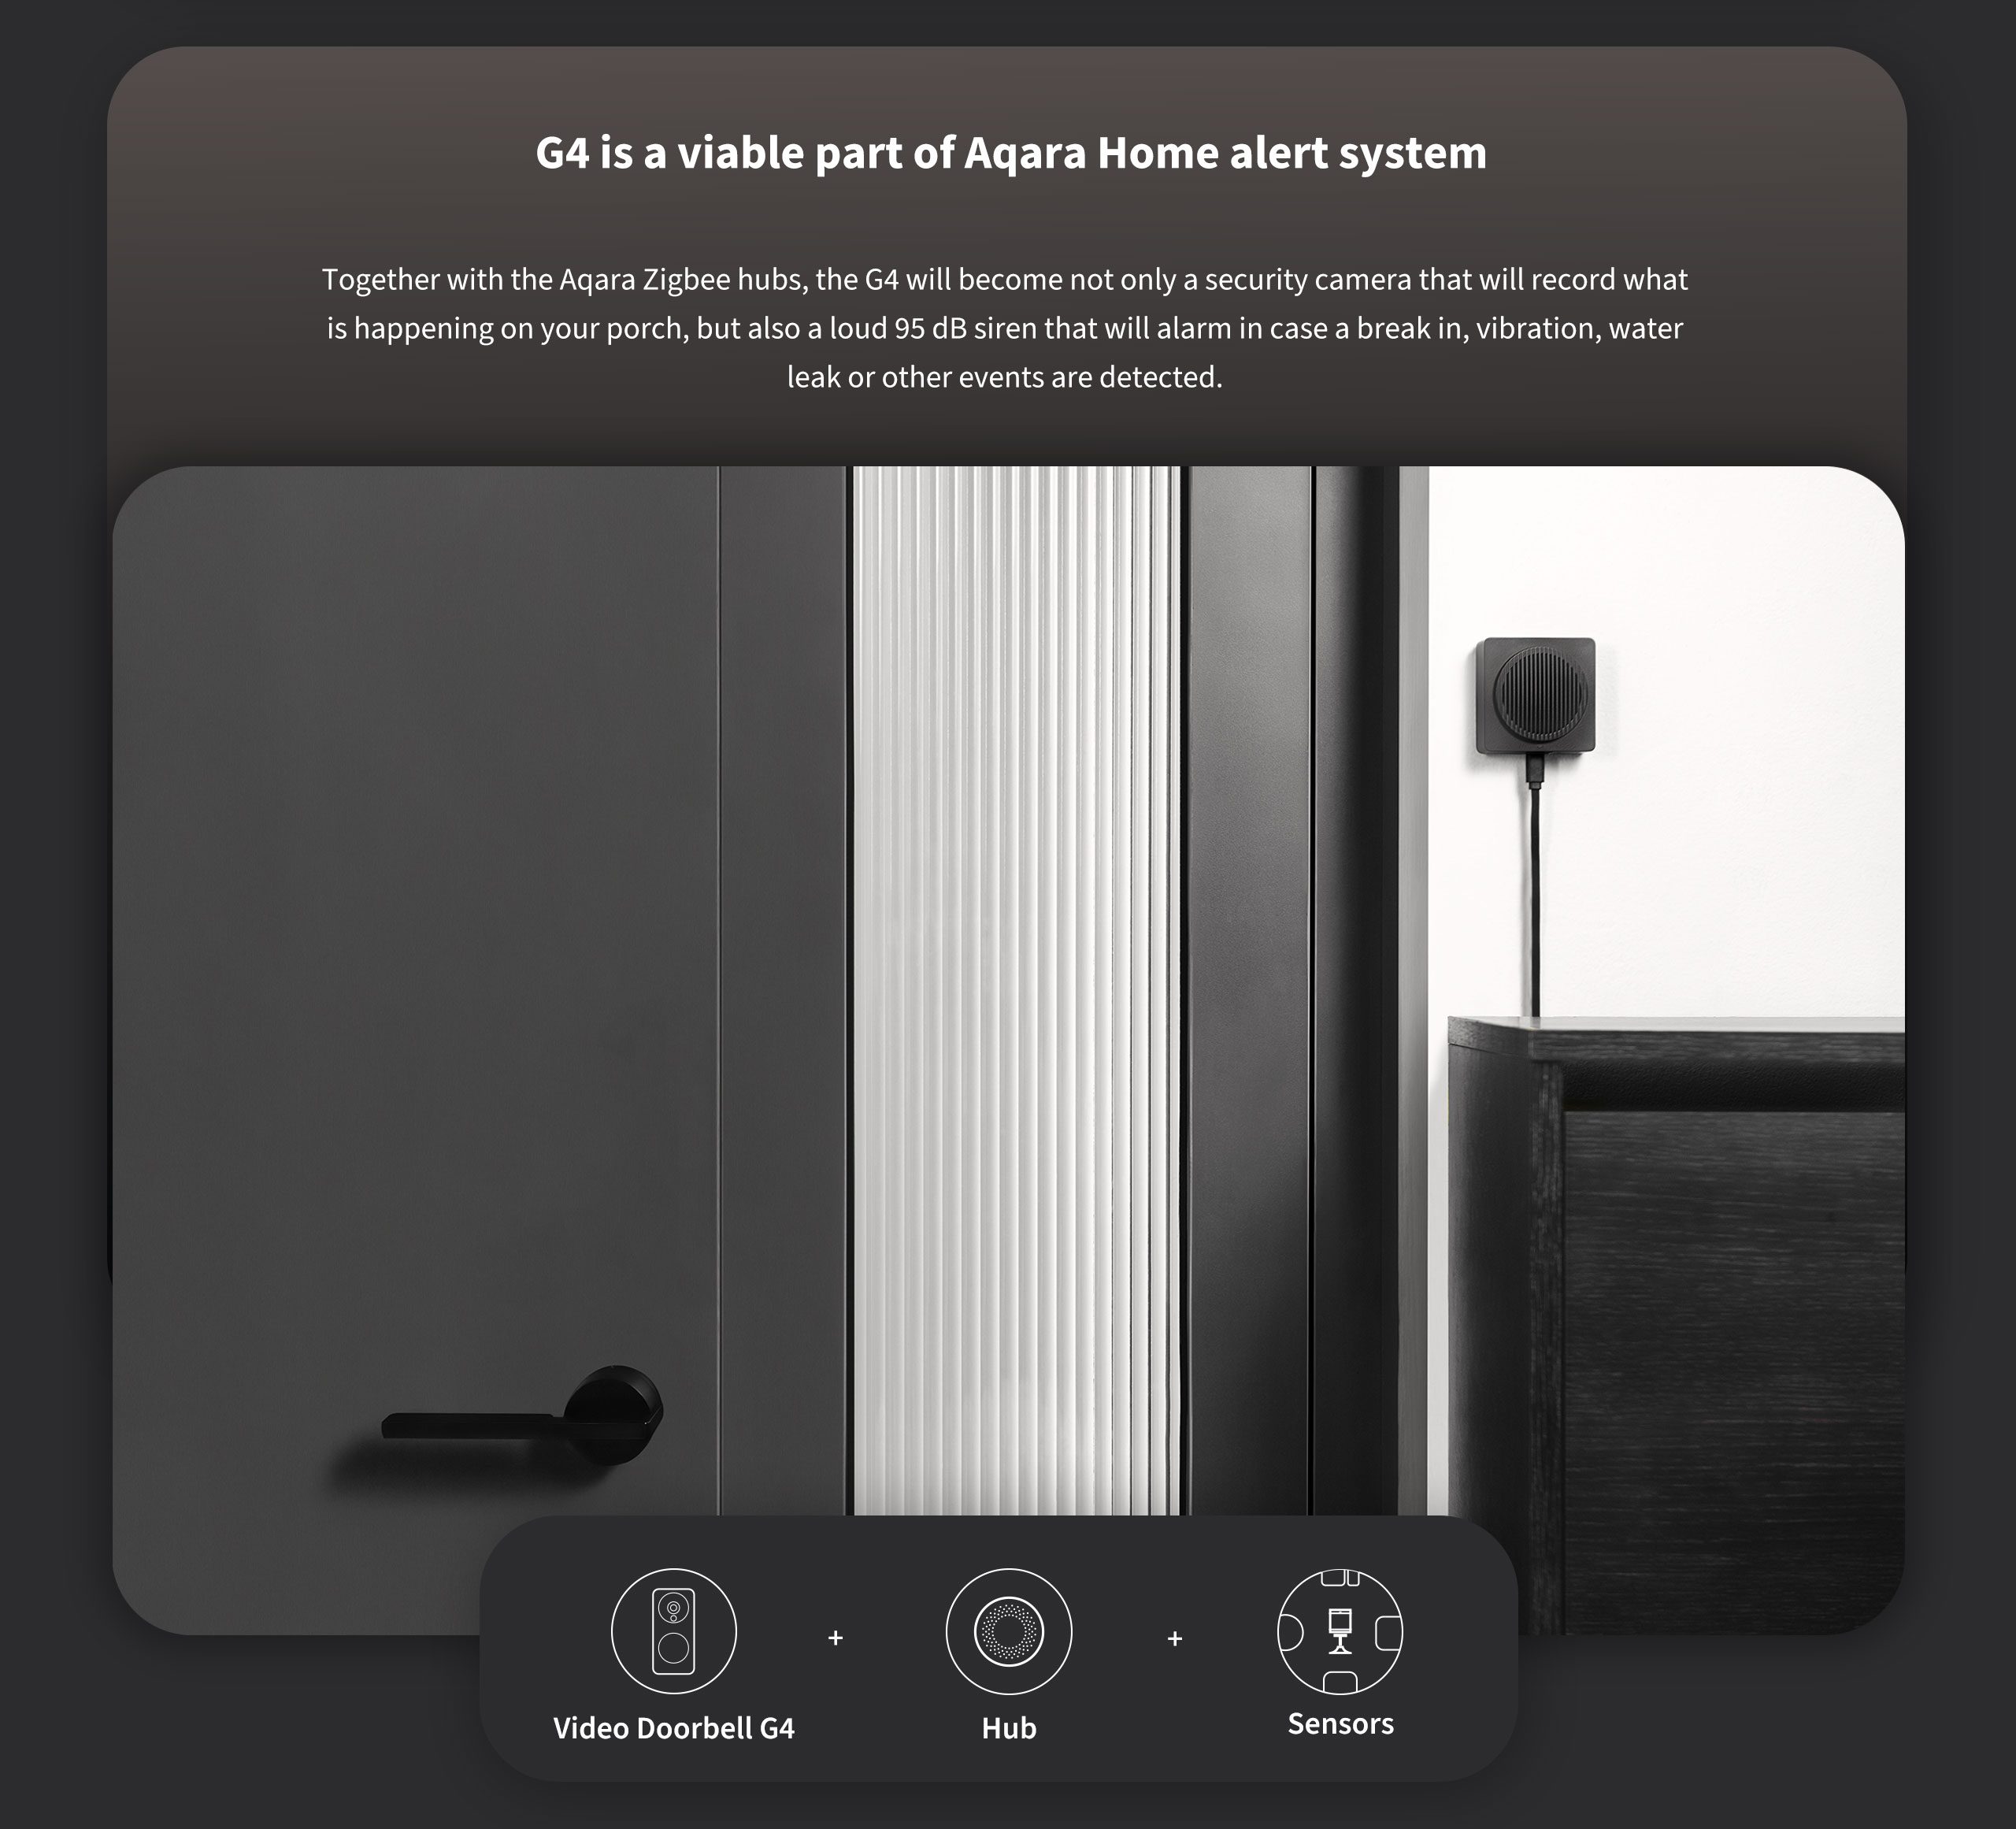 G4 Video Door Bell pc 8 Aqara Video Doorbell G4 (Chime Included), 1080p FHD HomeKit Secure Video Doorbell Camera, Local Face Recognition and Automations